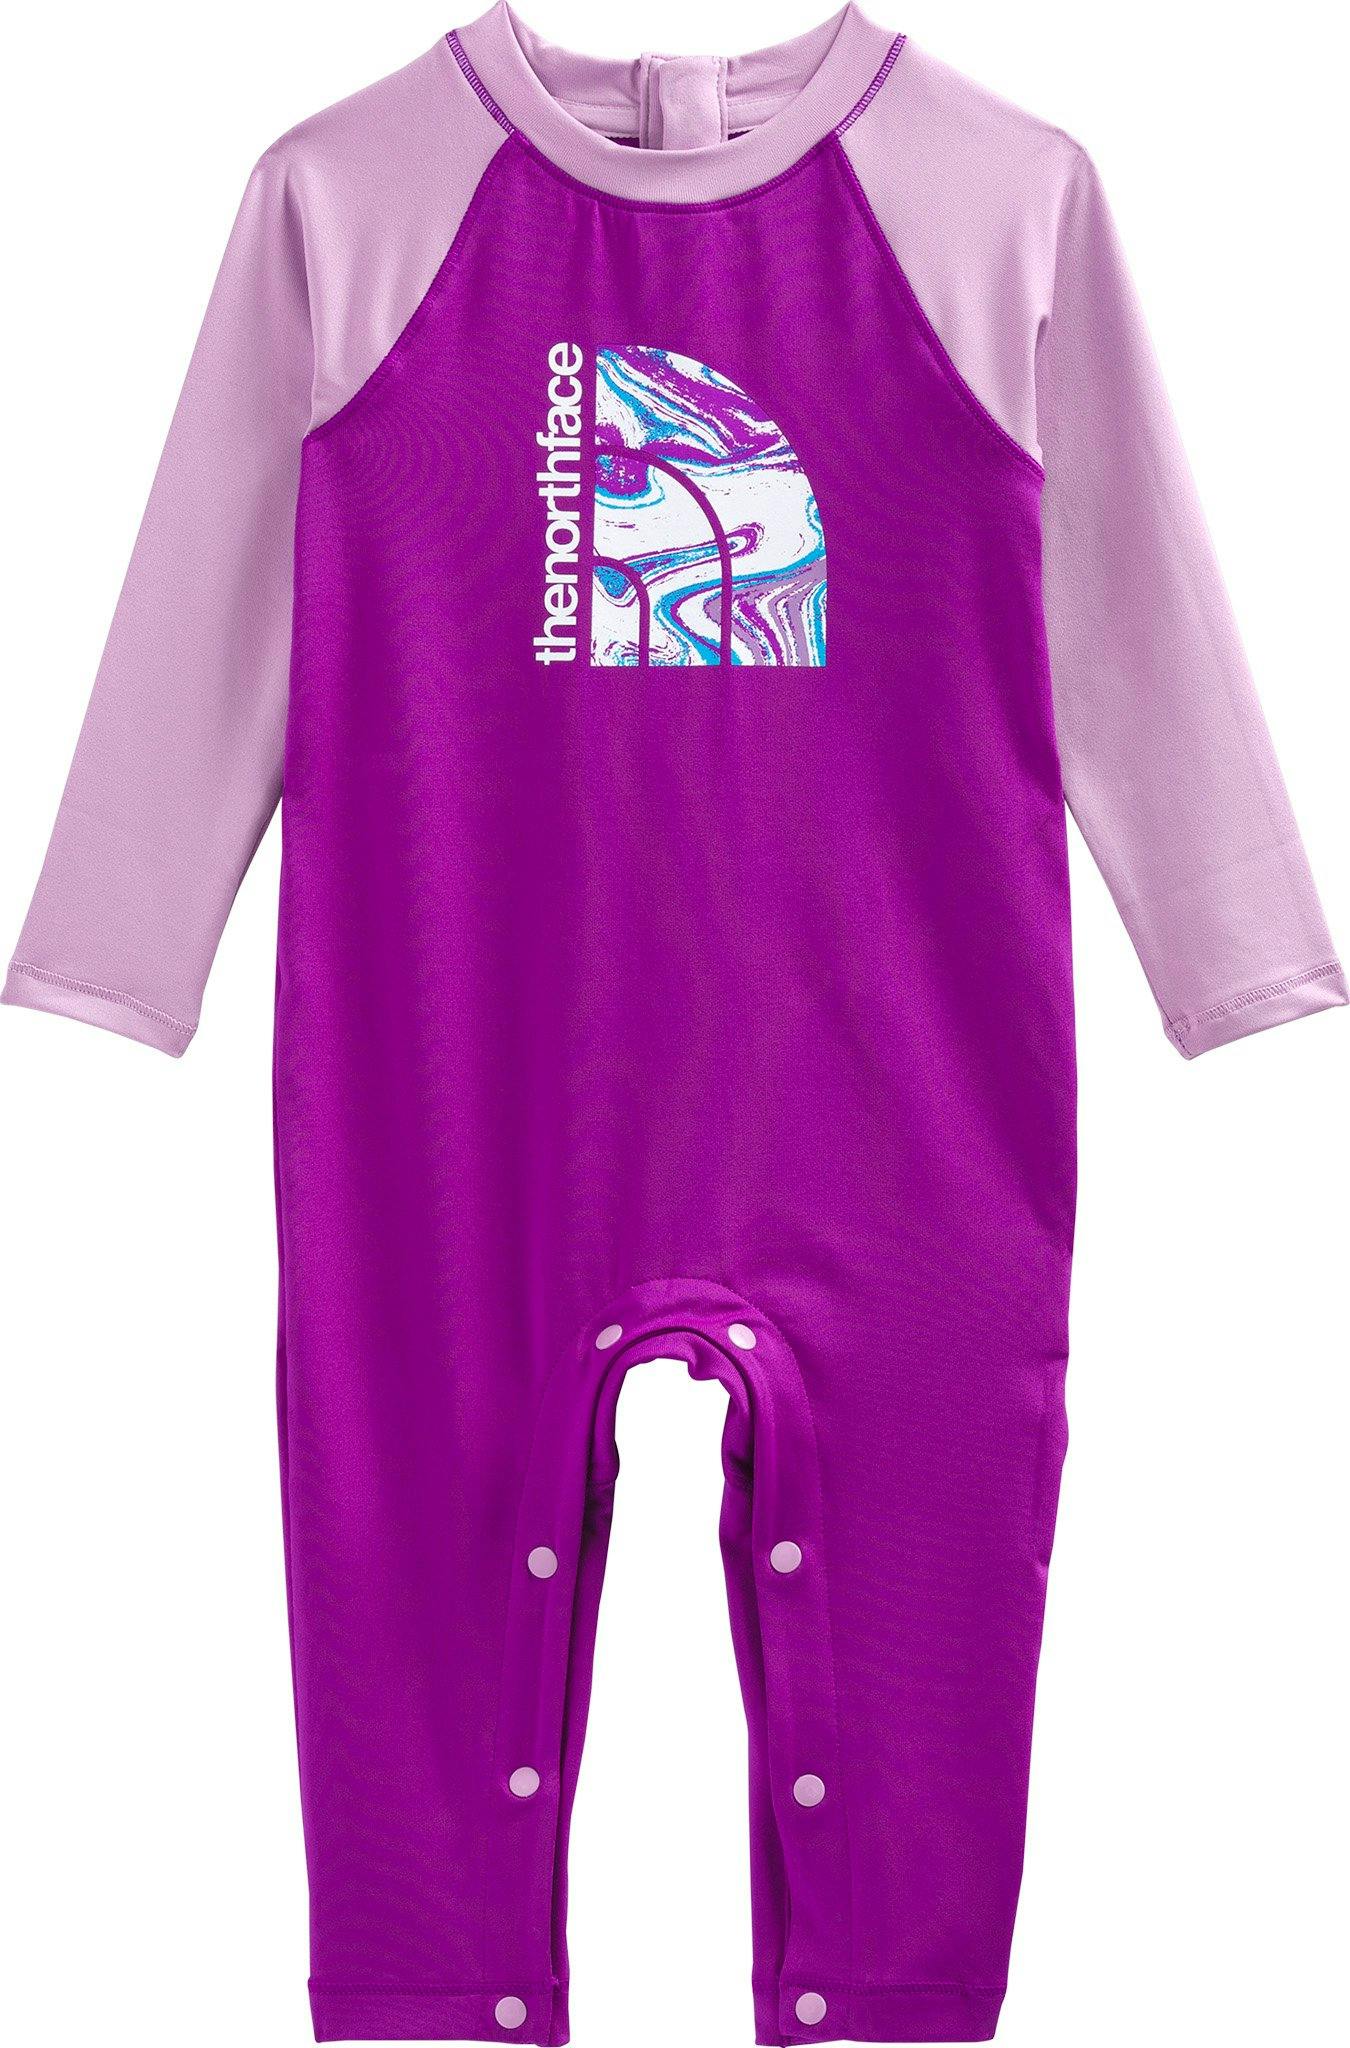 Product image for Amphibious Sun One Piece - Baby